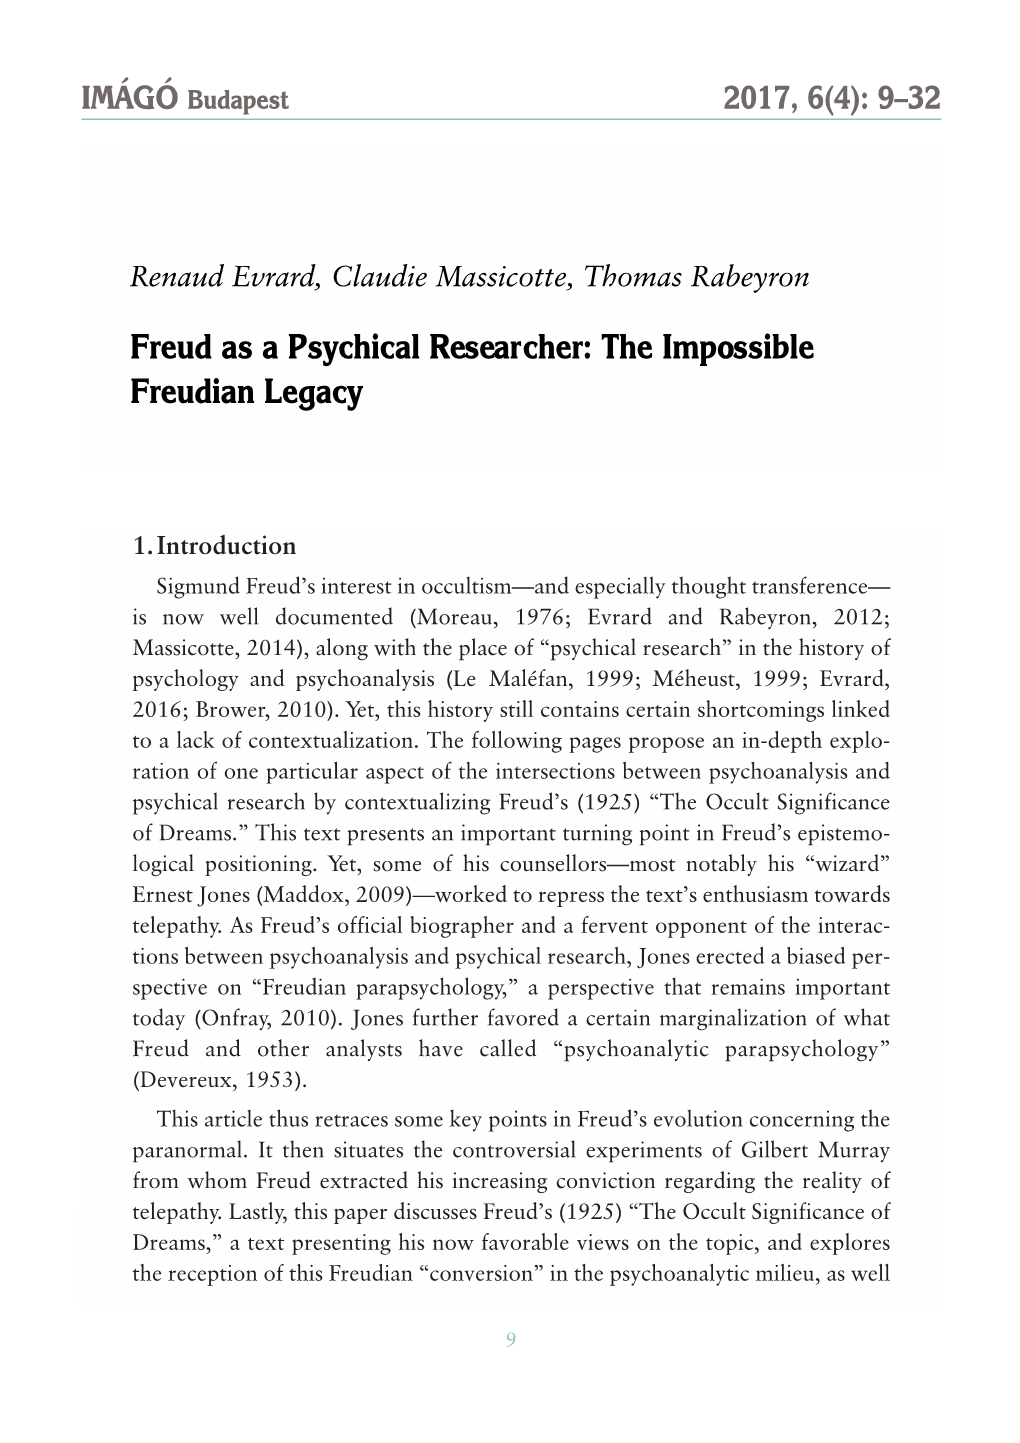 Freud As a Psychical Researcher: the Impossible Freudian Legacy